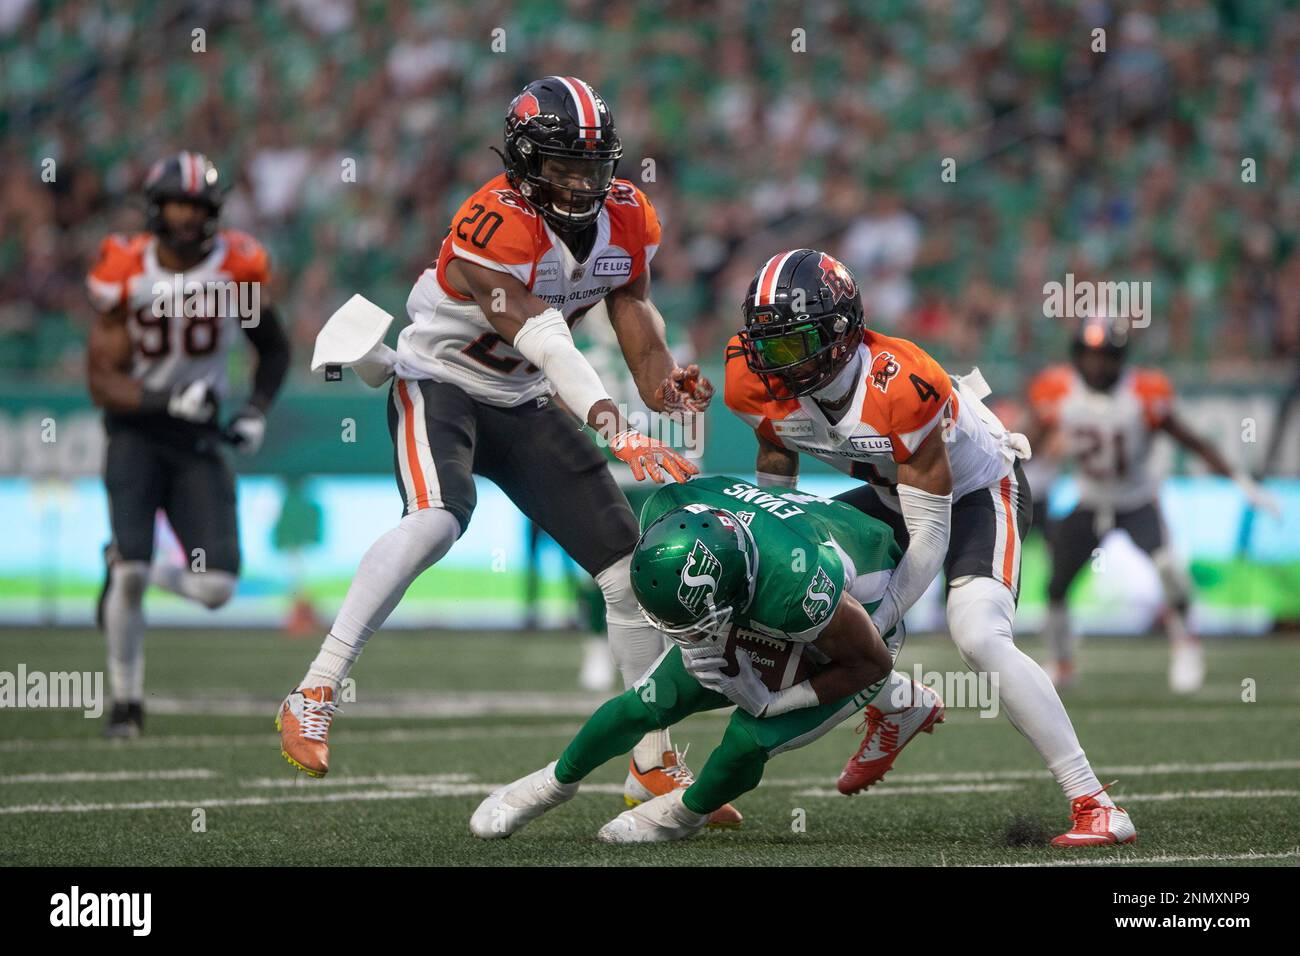 Saskatchewan Roughriders wide receiver Shaq Evans (1) catches the ball as  BC Lions defensive back Garry Peters and BC Lions linebacker Boseko Lokombo  (20) go to make a tackle during the first